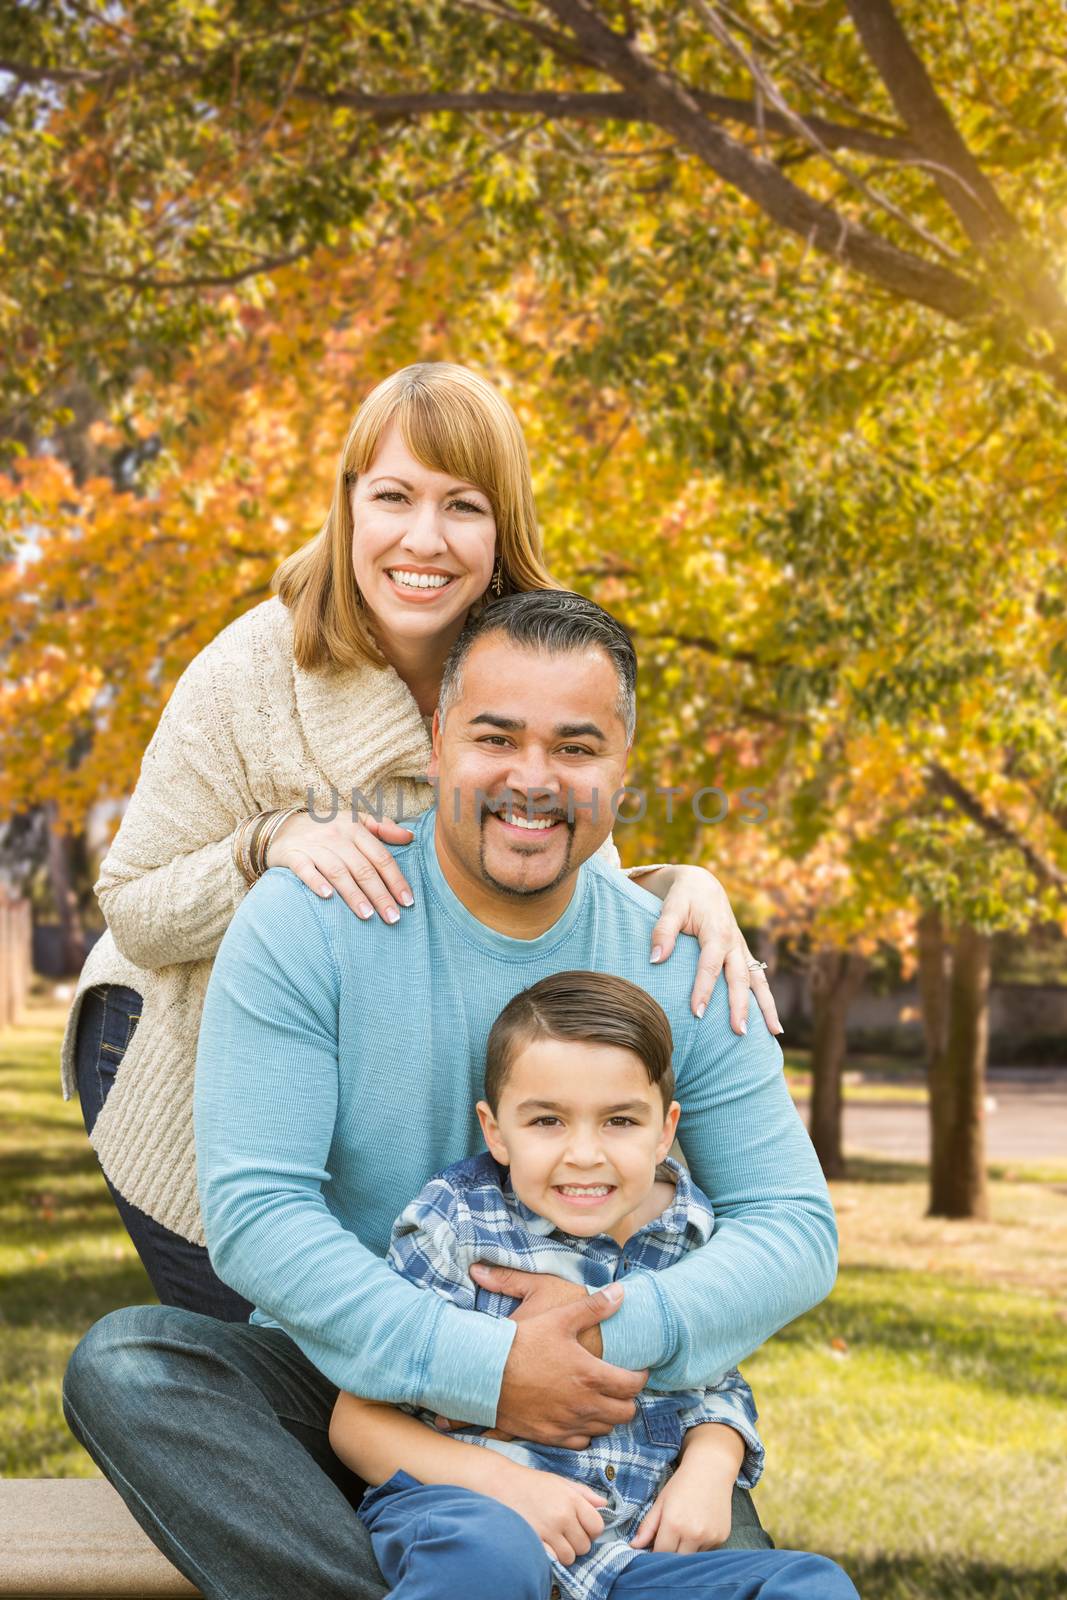 Mixed Race Hispanic and Caucasian Family Portrait at the Park by Feverpitched